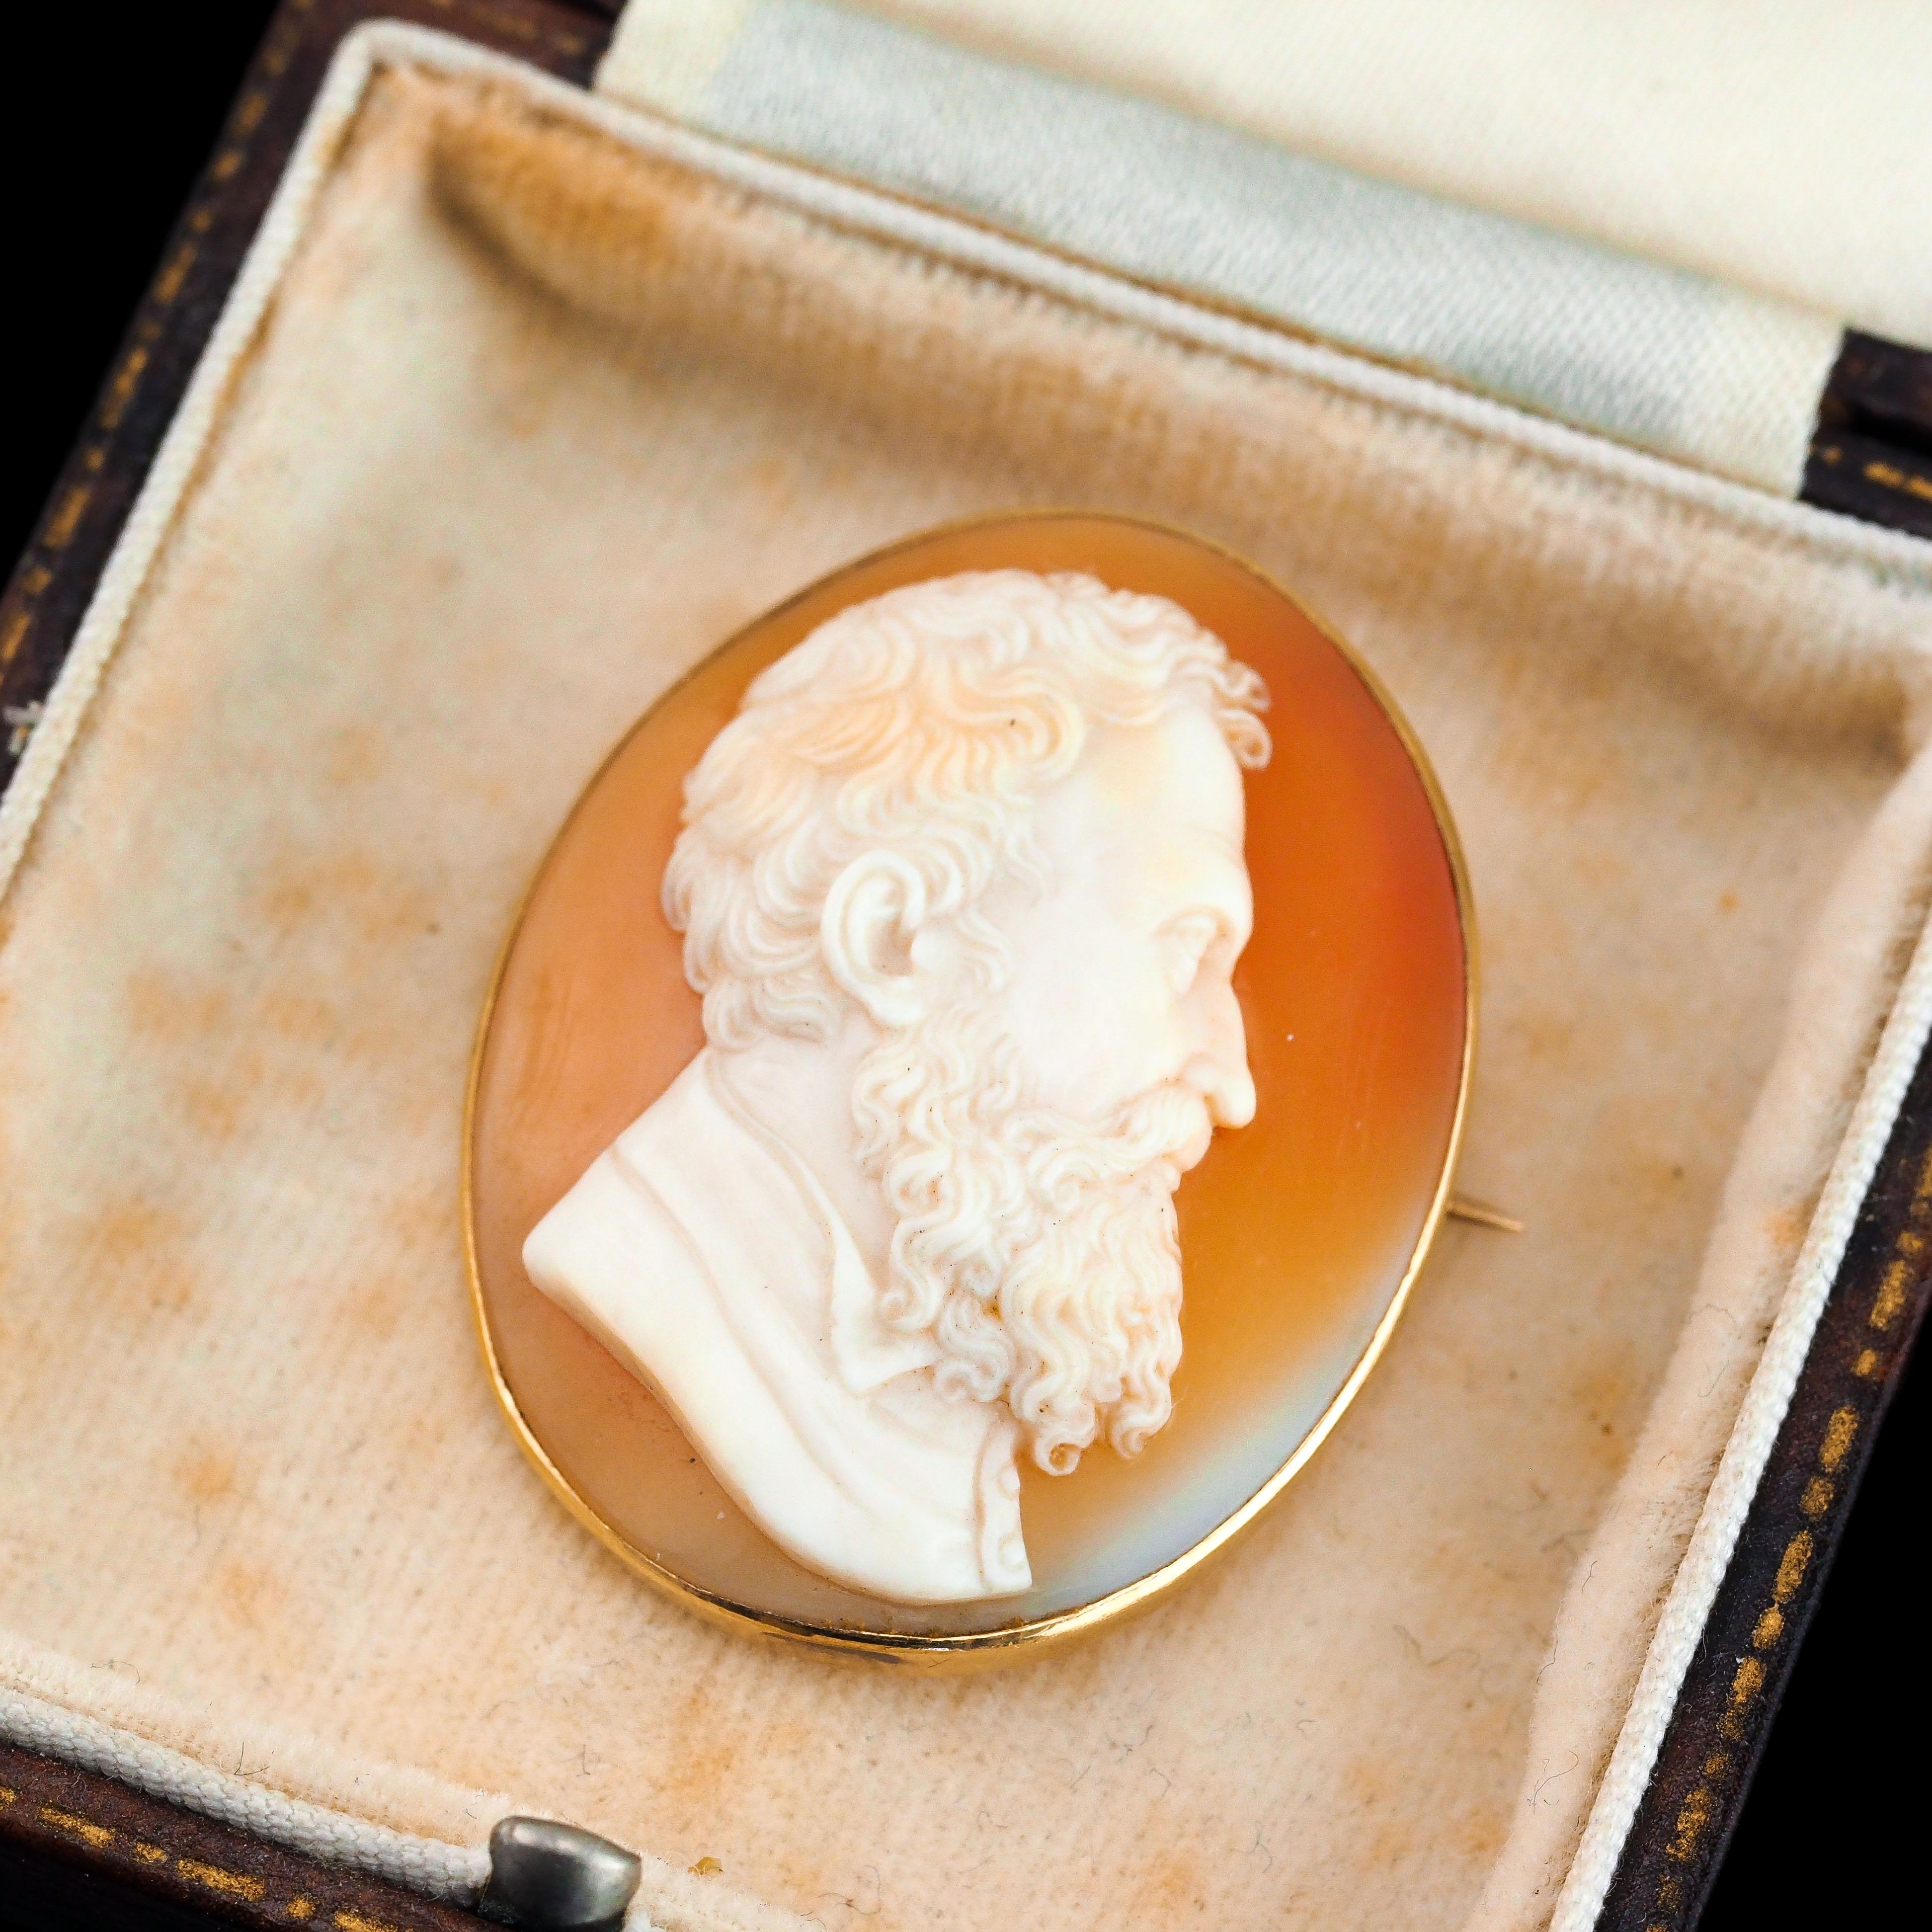 Antique Victorian Cameo Brooch 14K Gold with Portrait of a Gentleman - c.1890 4